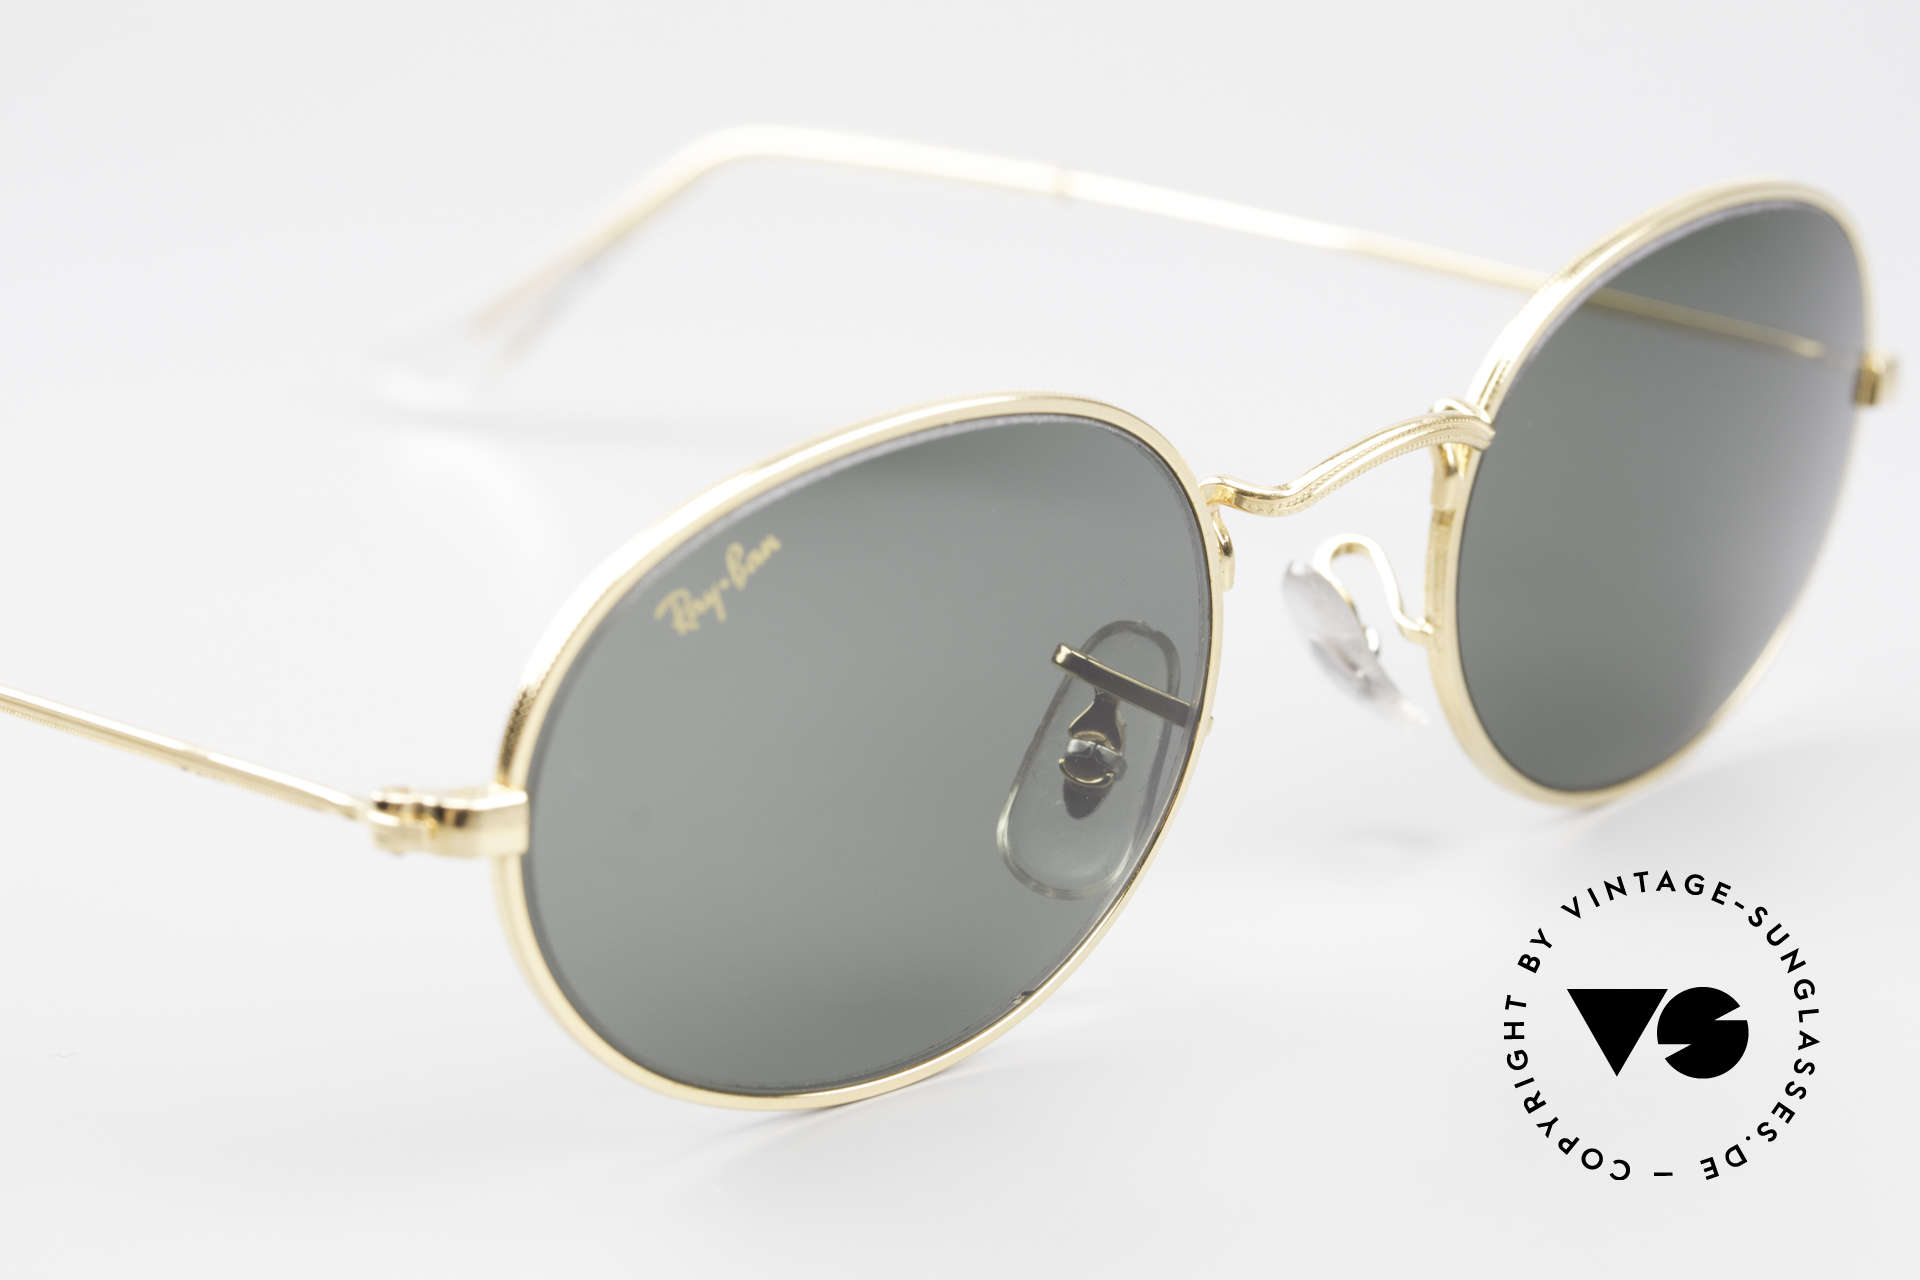 Ray Ban Classic Style I Old B&L USA Sunglasses Oval, original B&L name: W0976, GOLD, G-15, 49mm, Made for Men and Women